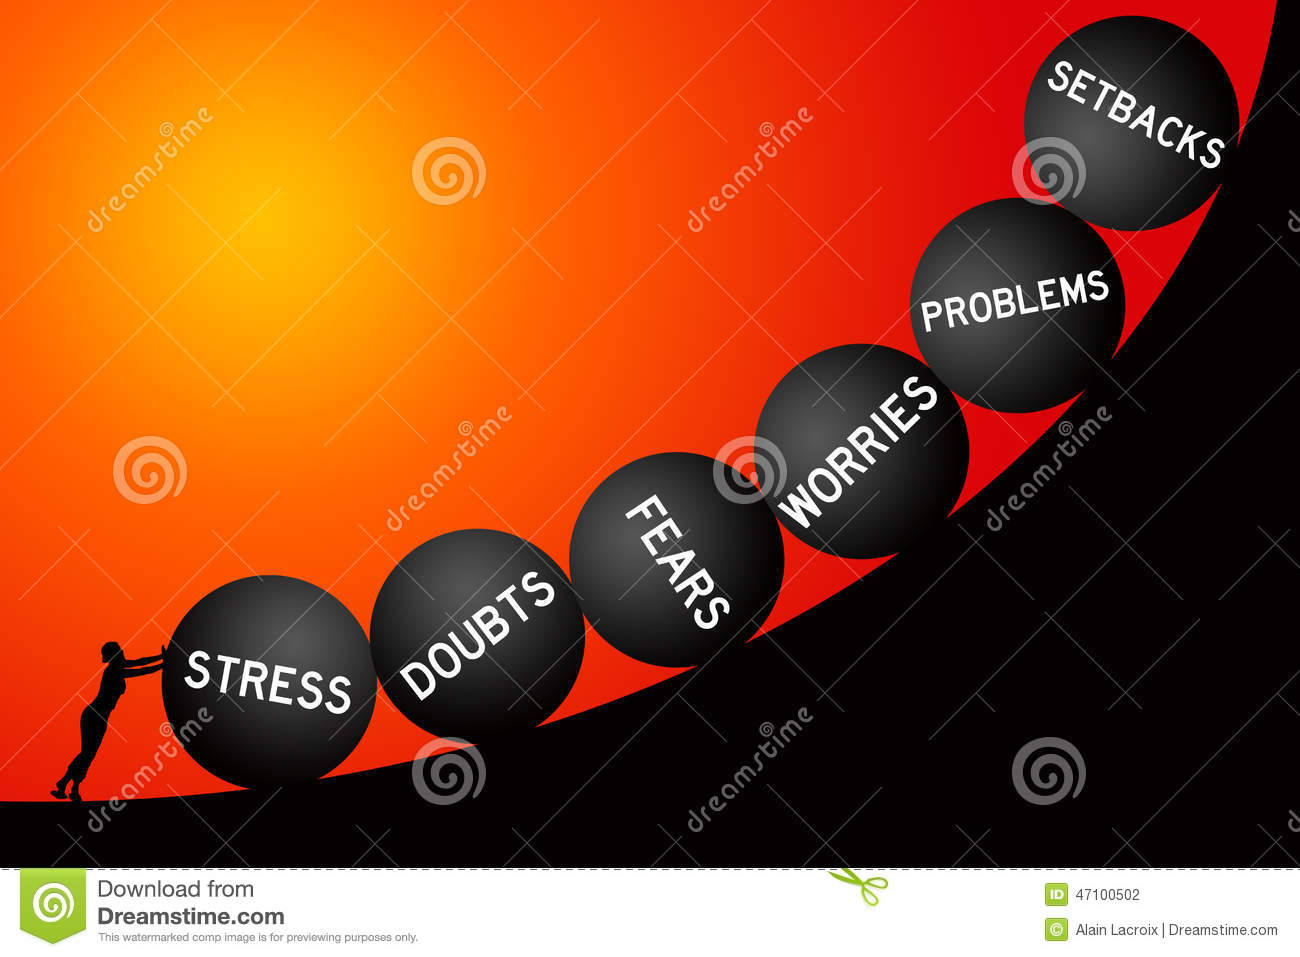 Personal Problems Stock Illustration   Image  47100502